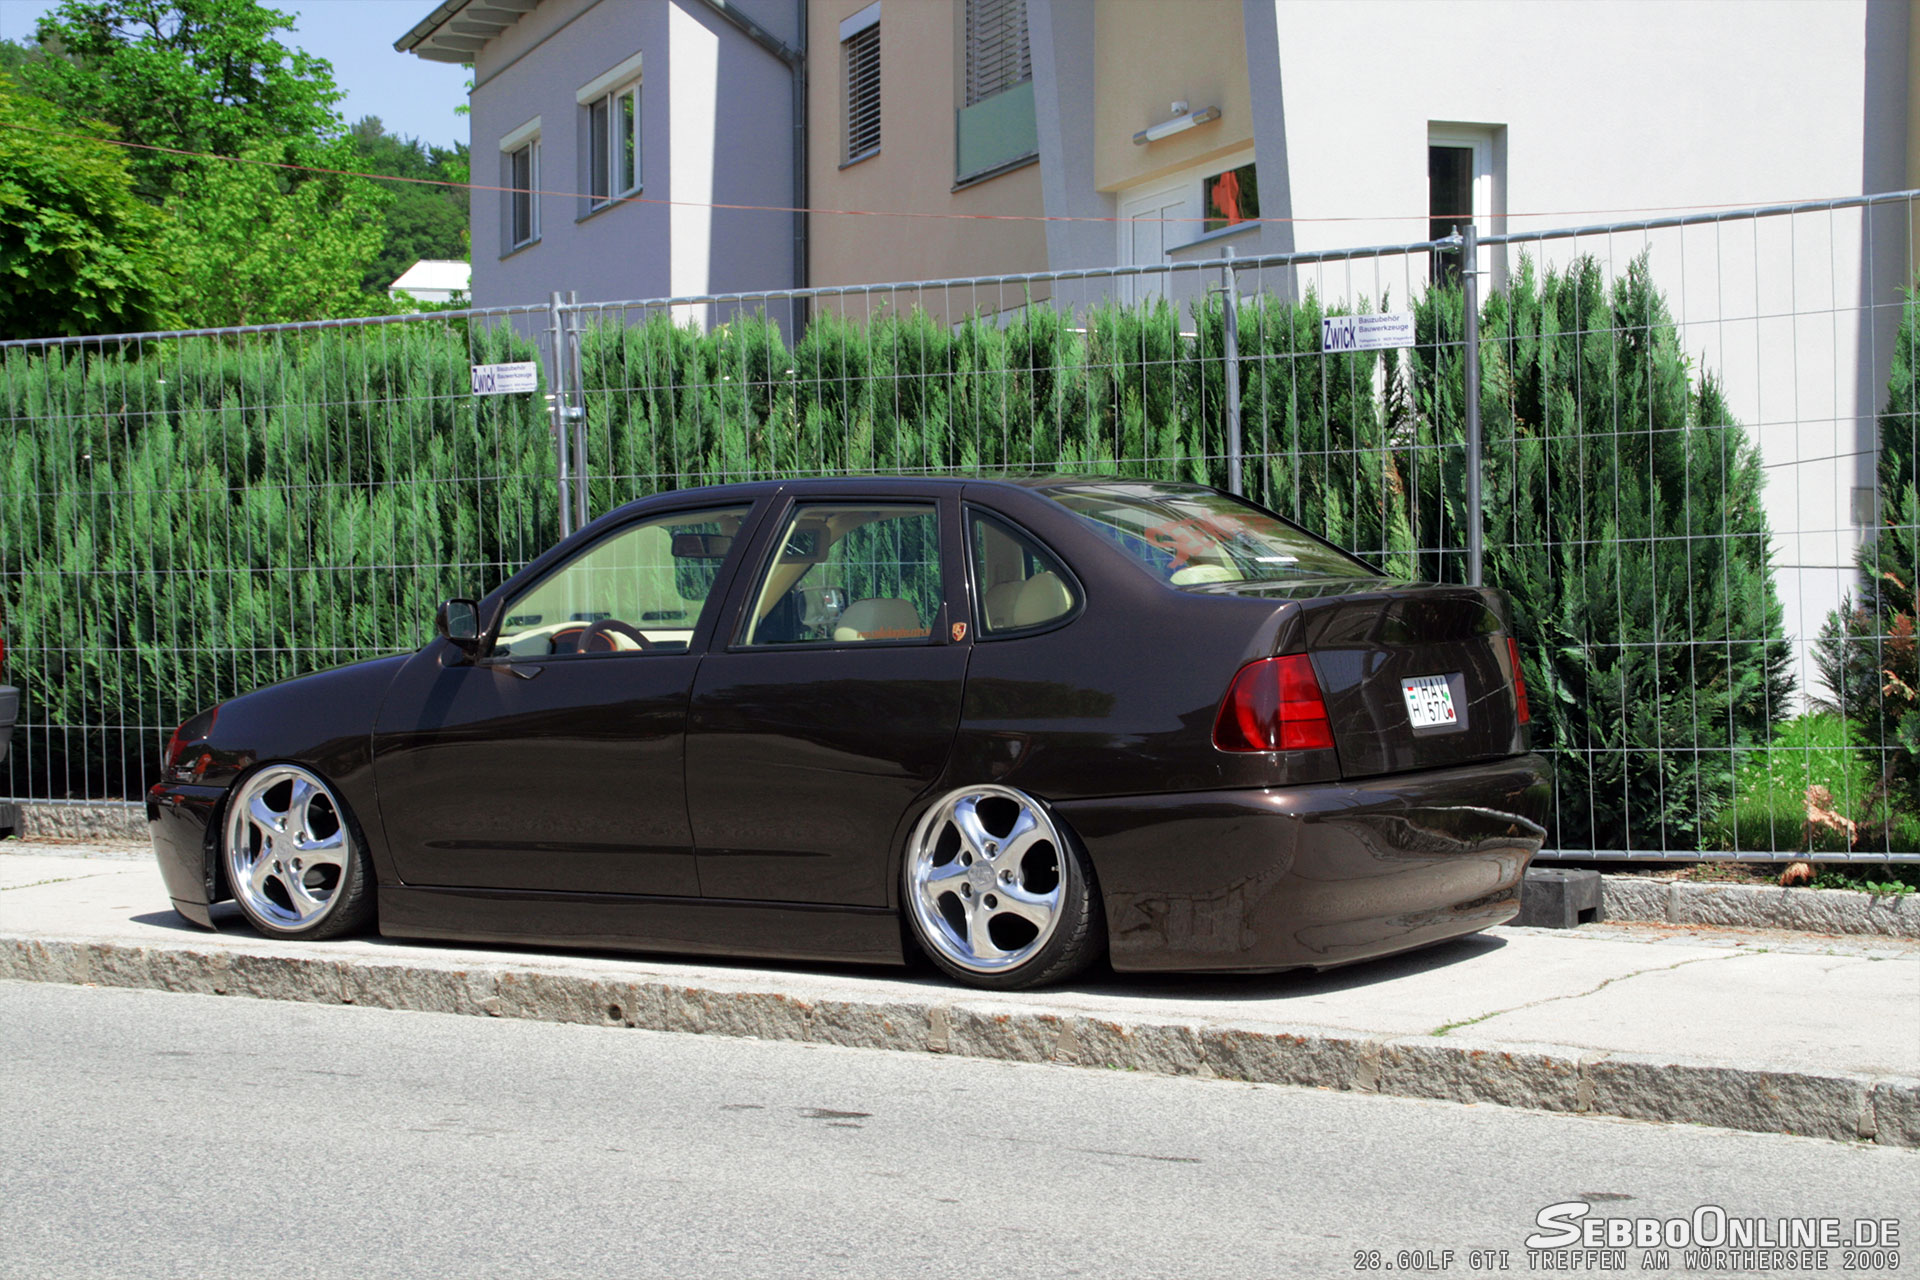 VW Polo Tuning by vwstyle on DeviantArt